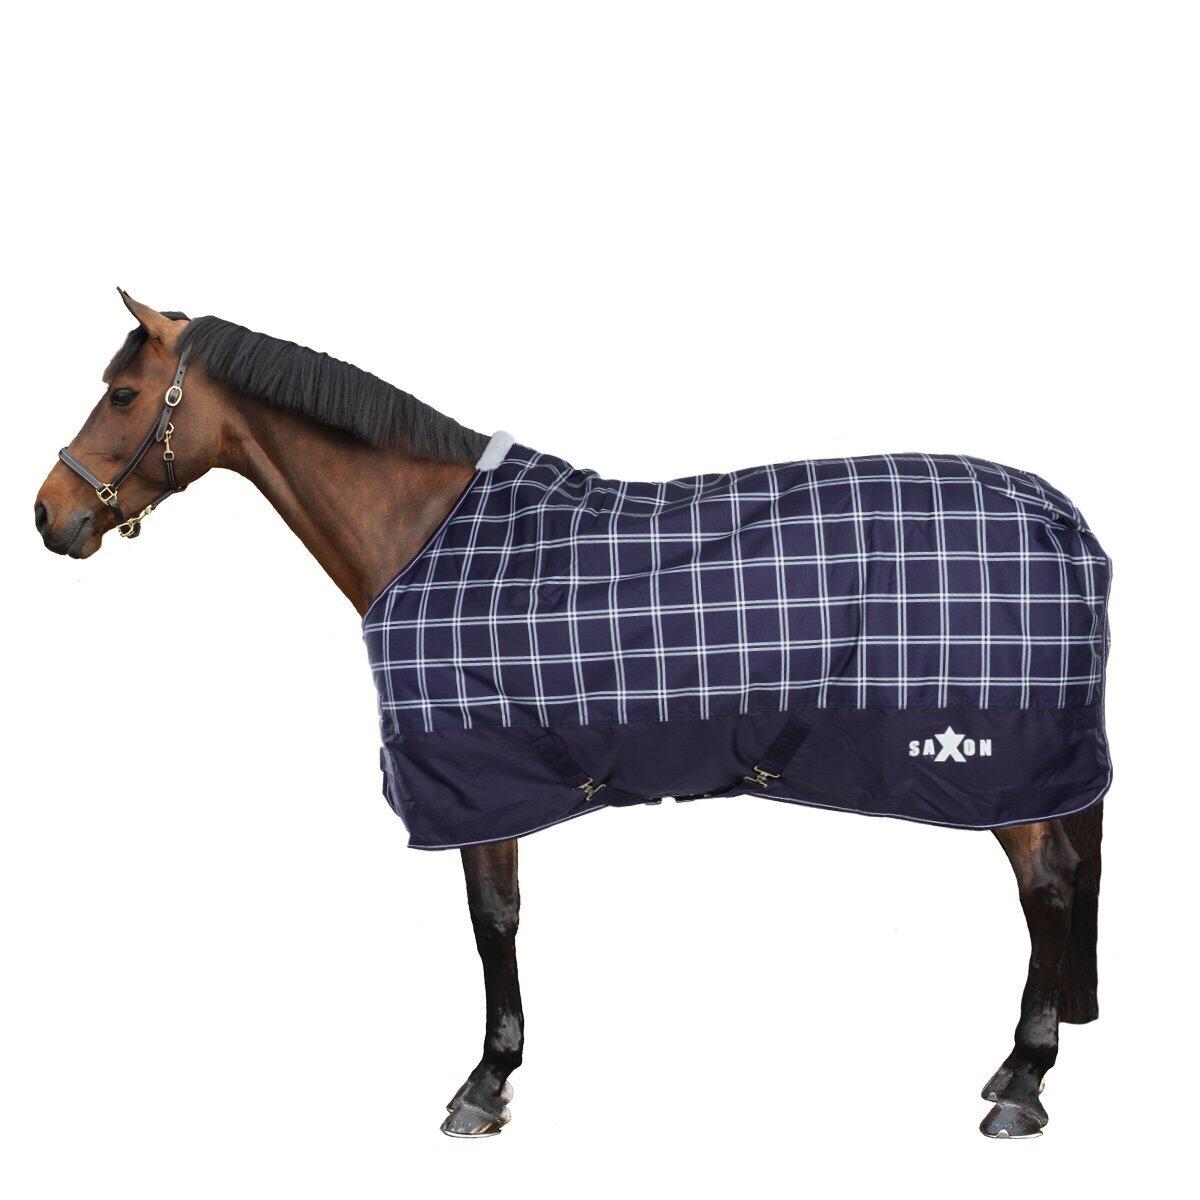 Defiant StandardNeck Plaid Midweight Horse Turnout Rug (Navy/White) 1/4